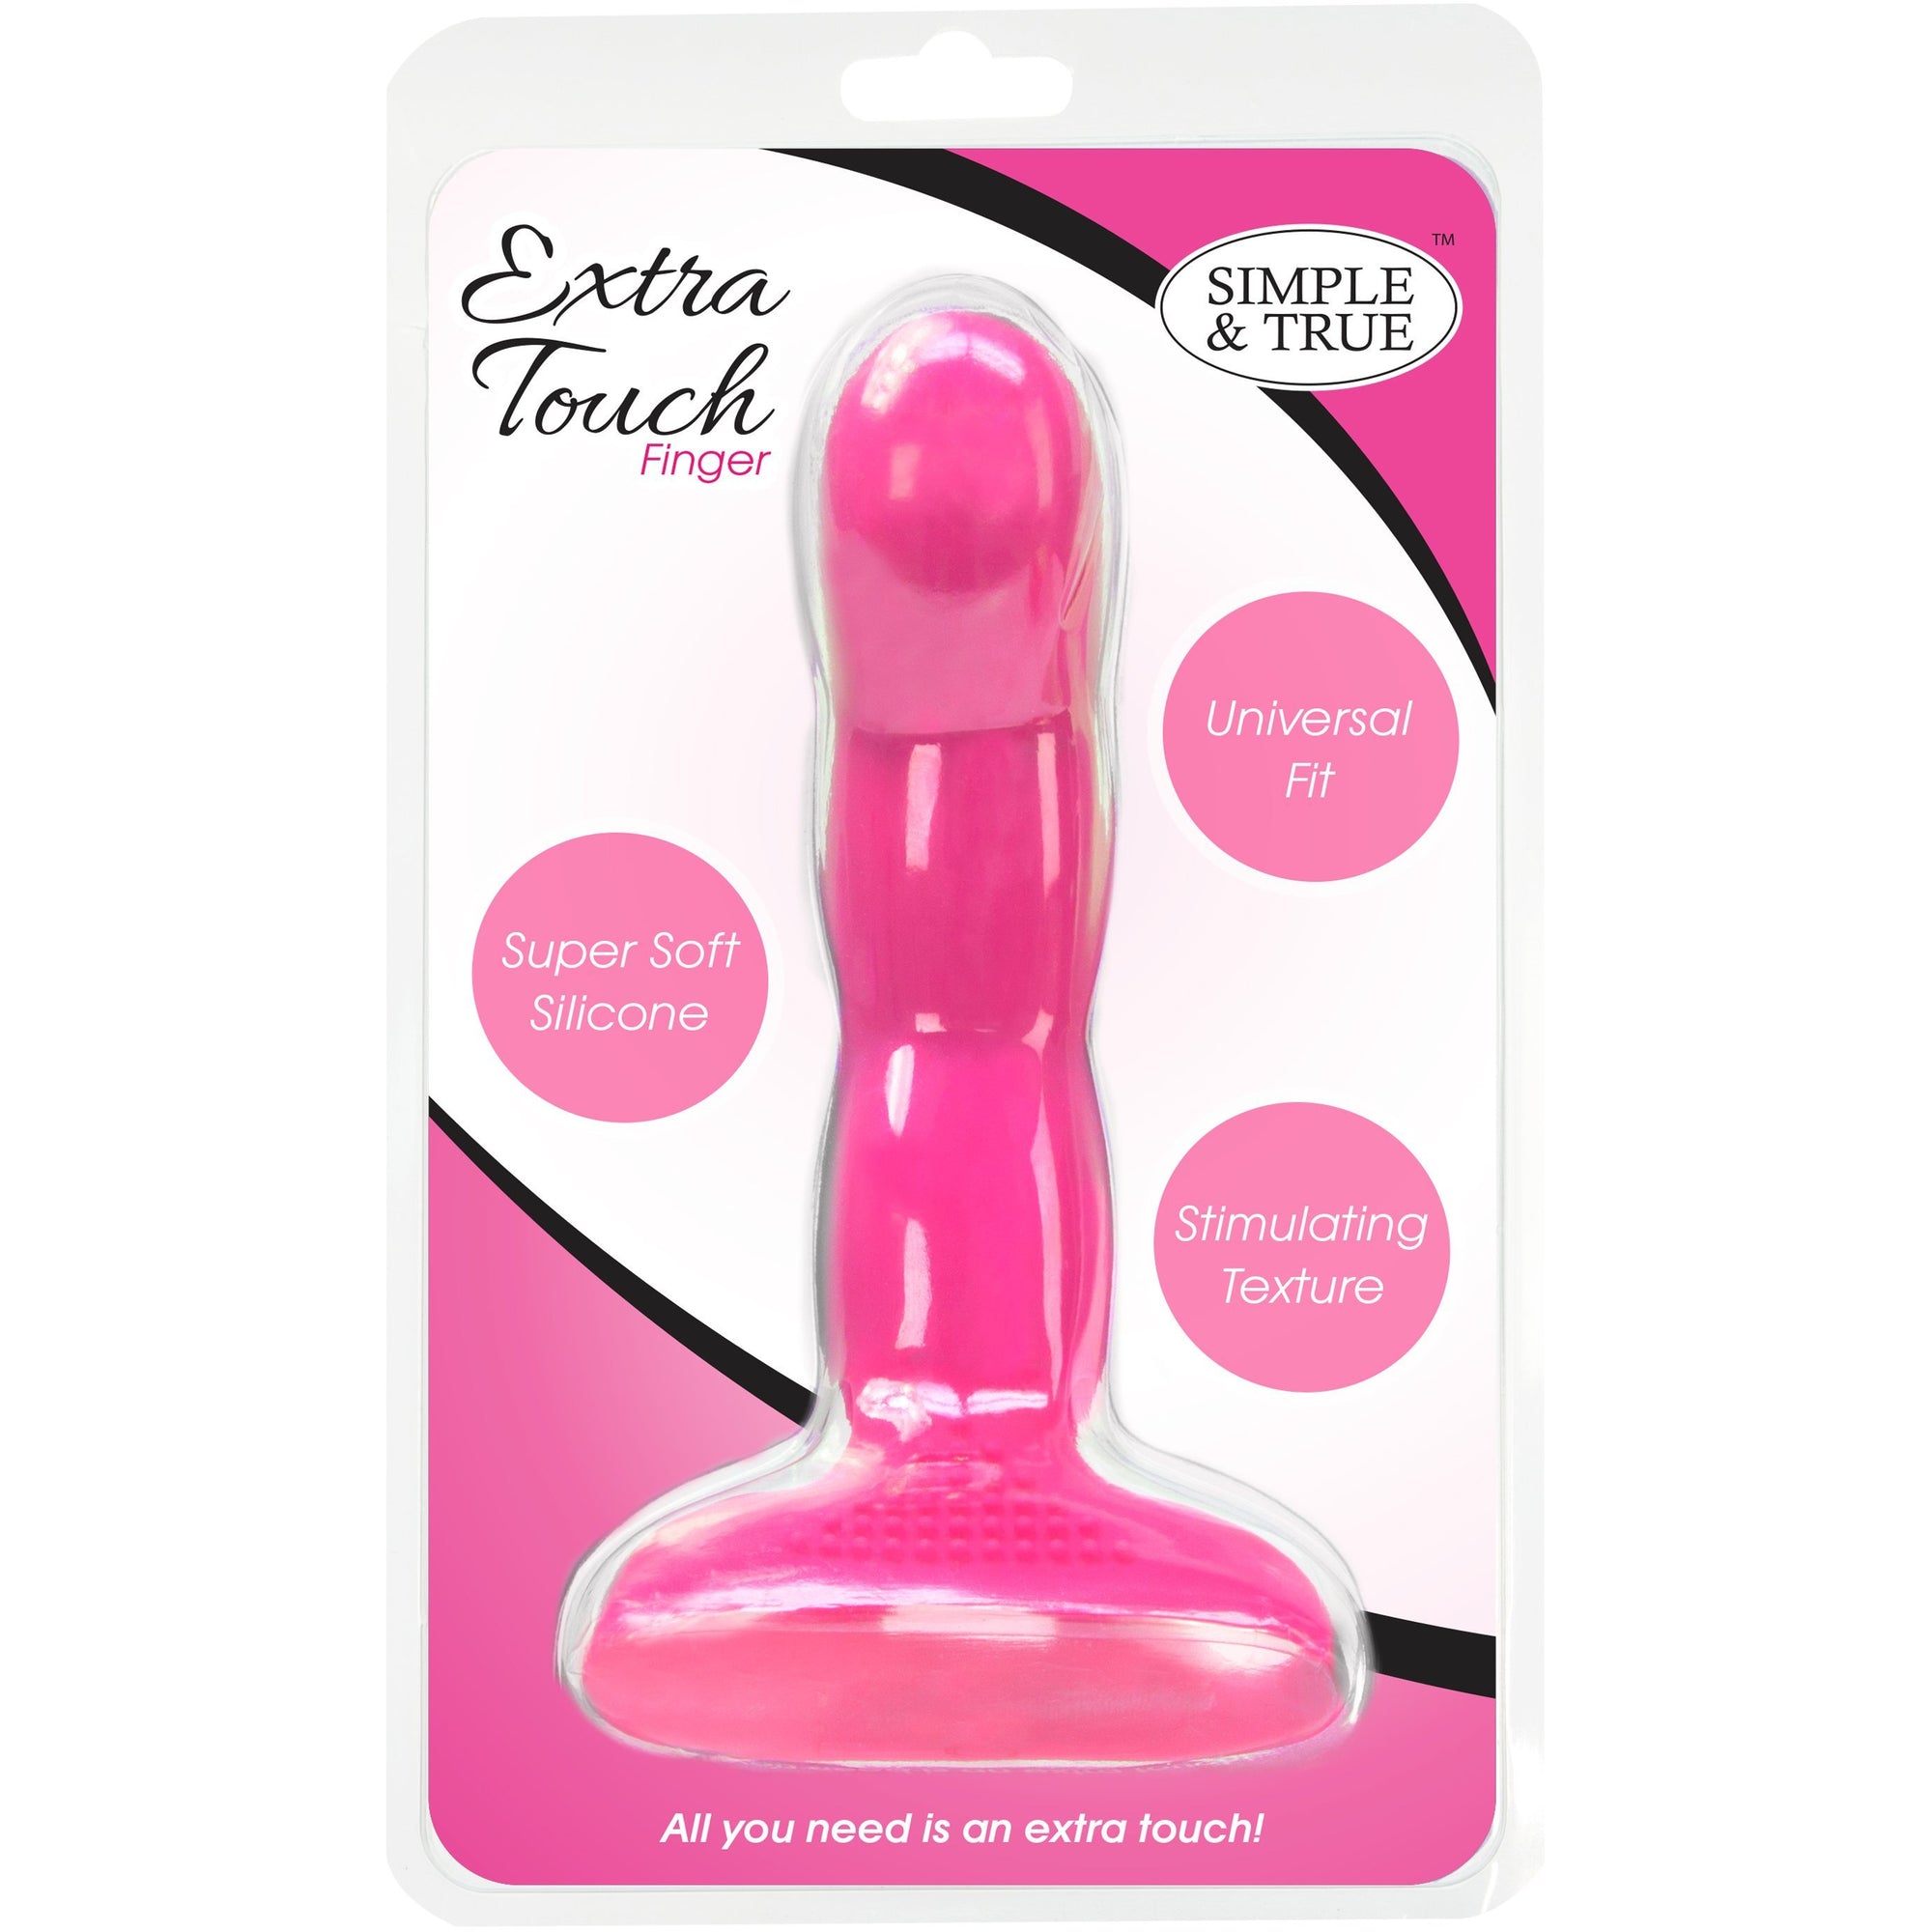 Simple and True Extra Touch Finger Dong - Pink